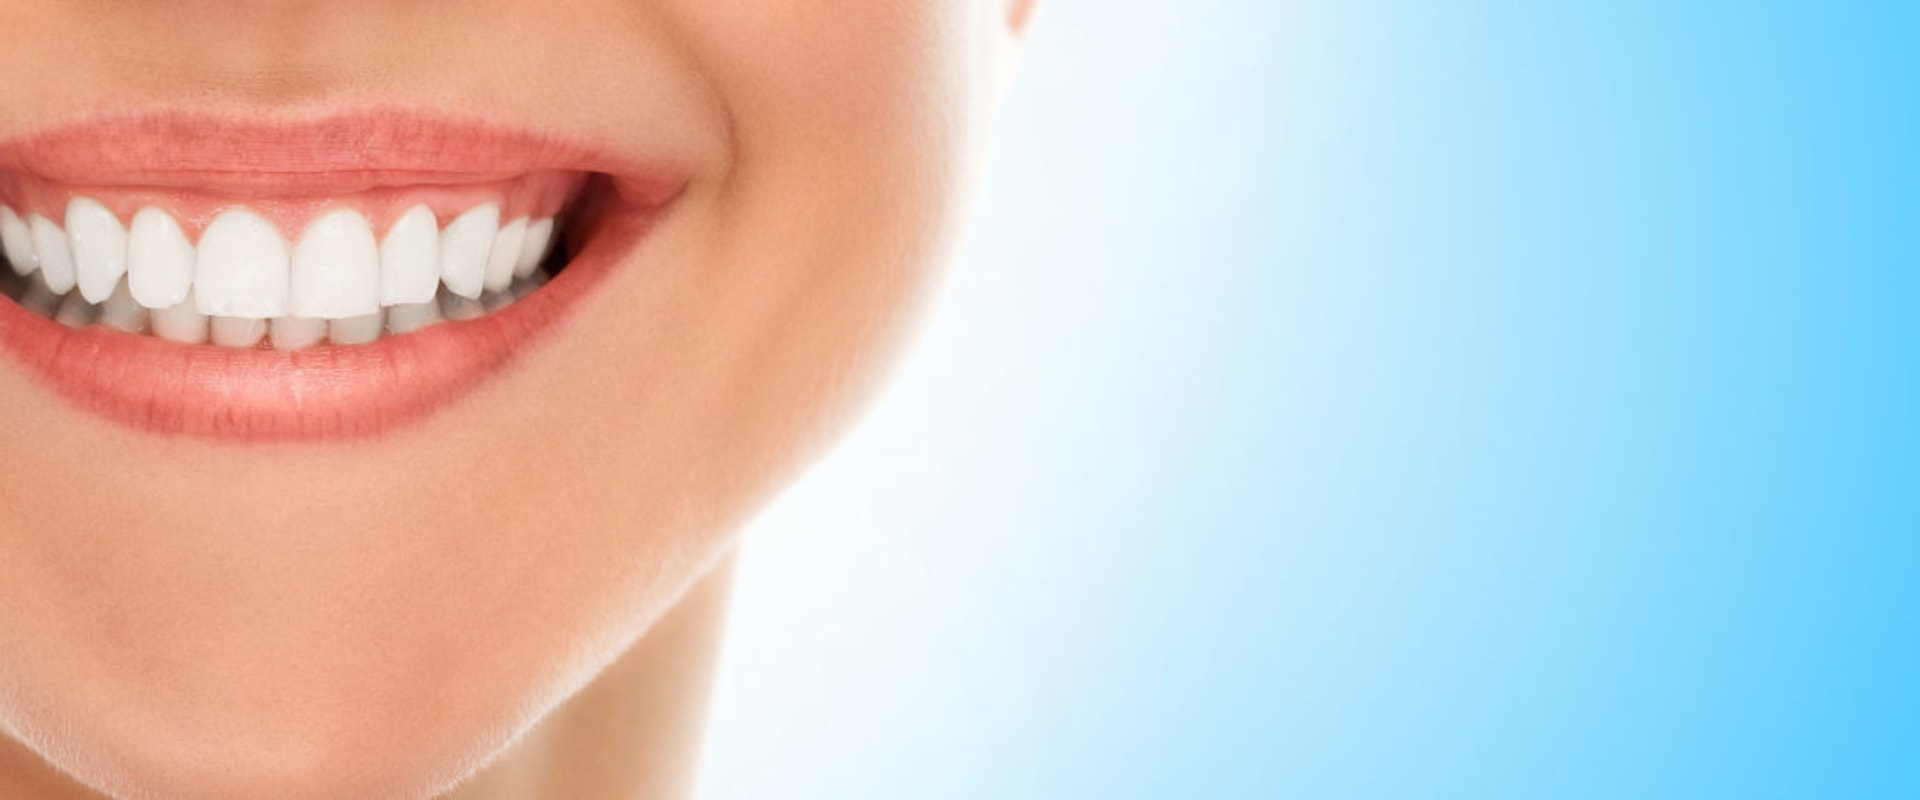 What is classified as cosmetic dentistry?